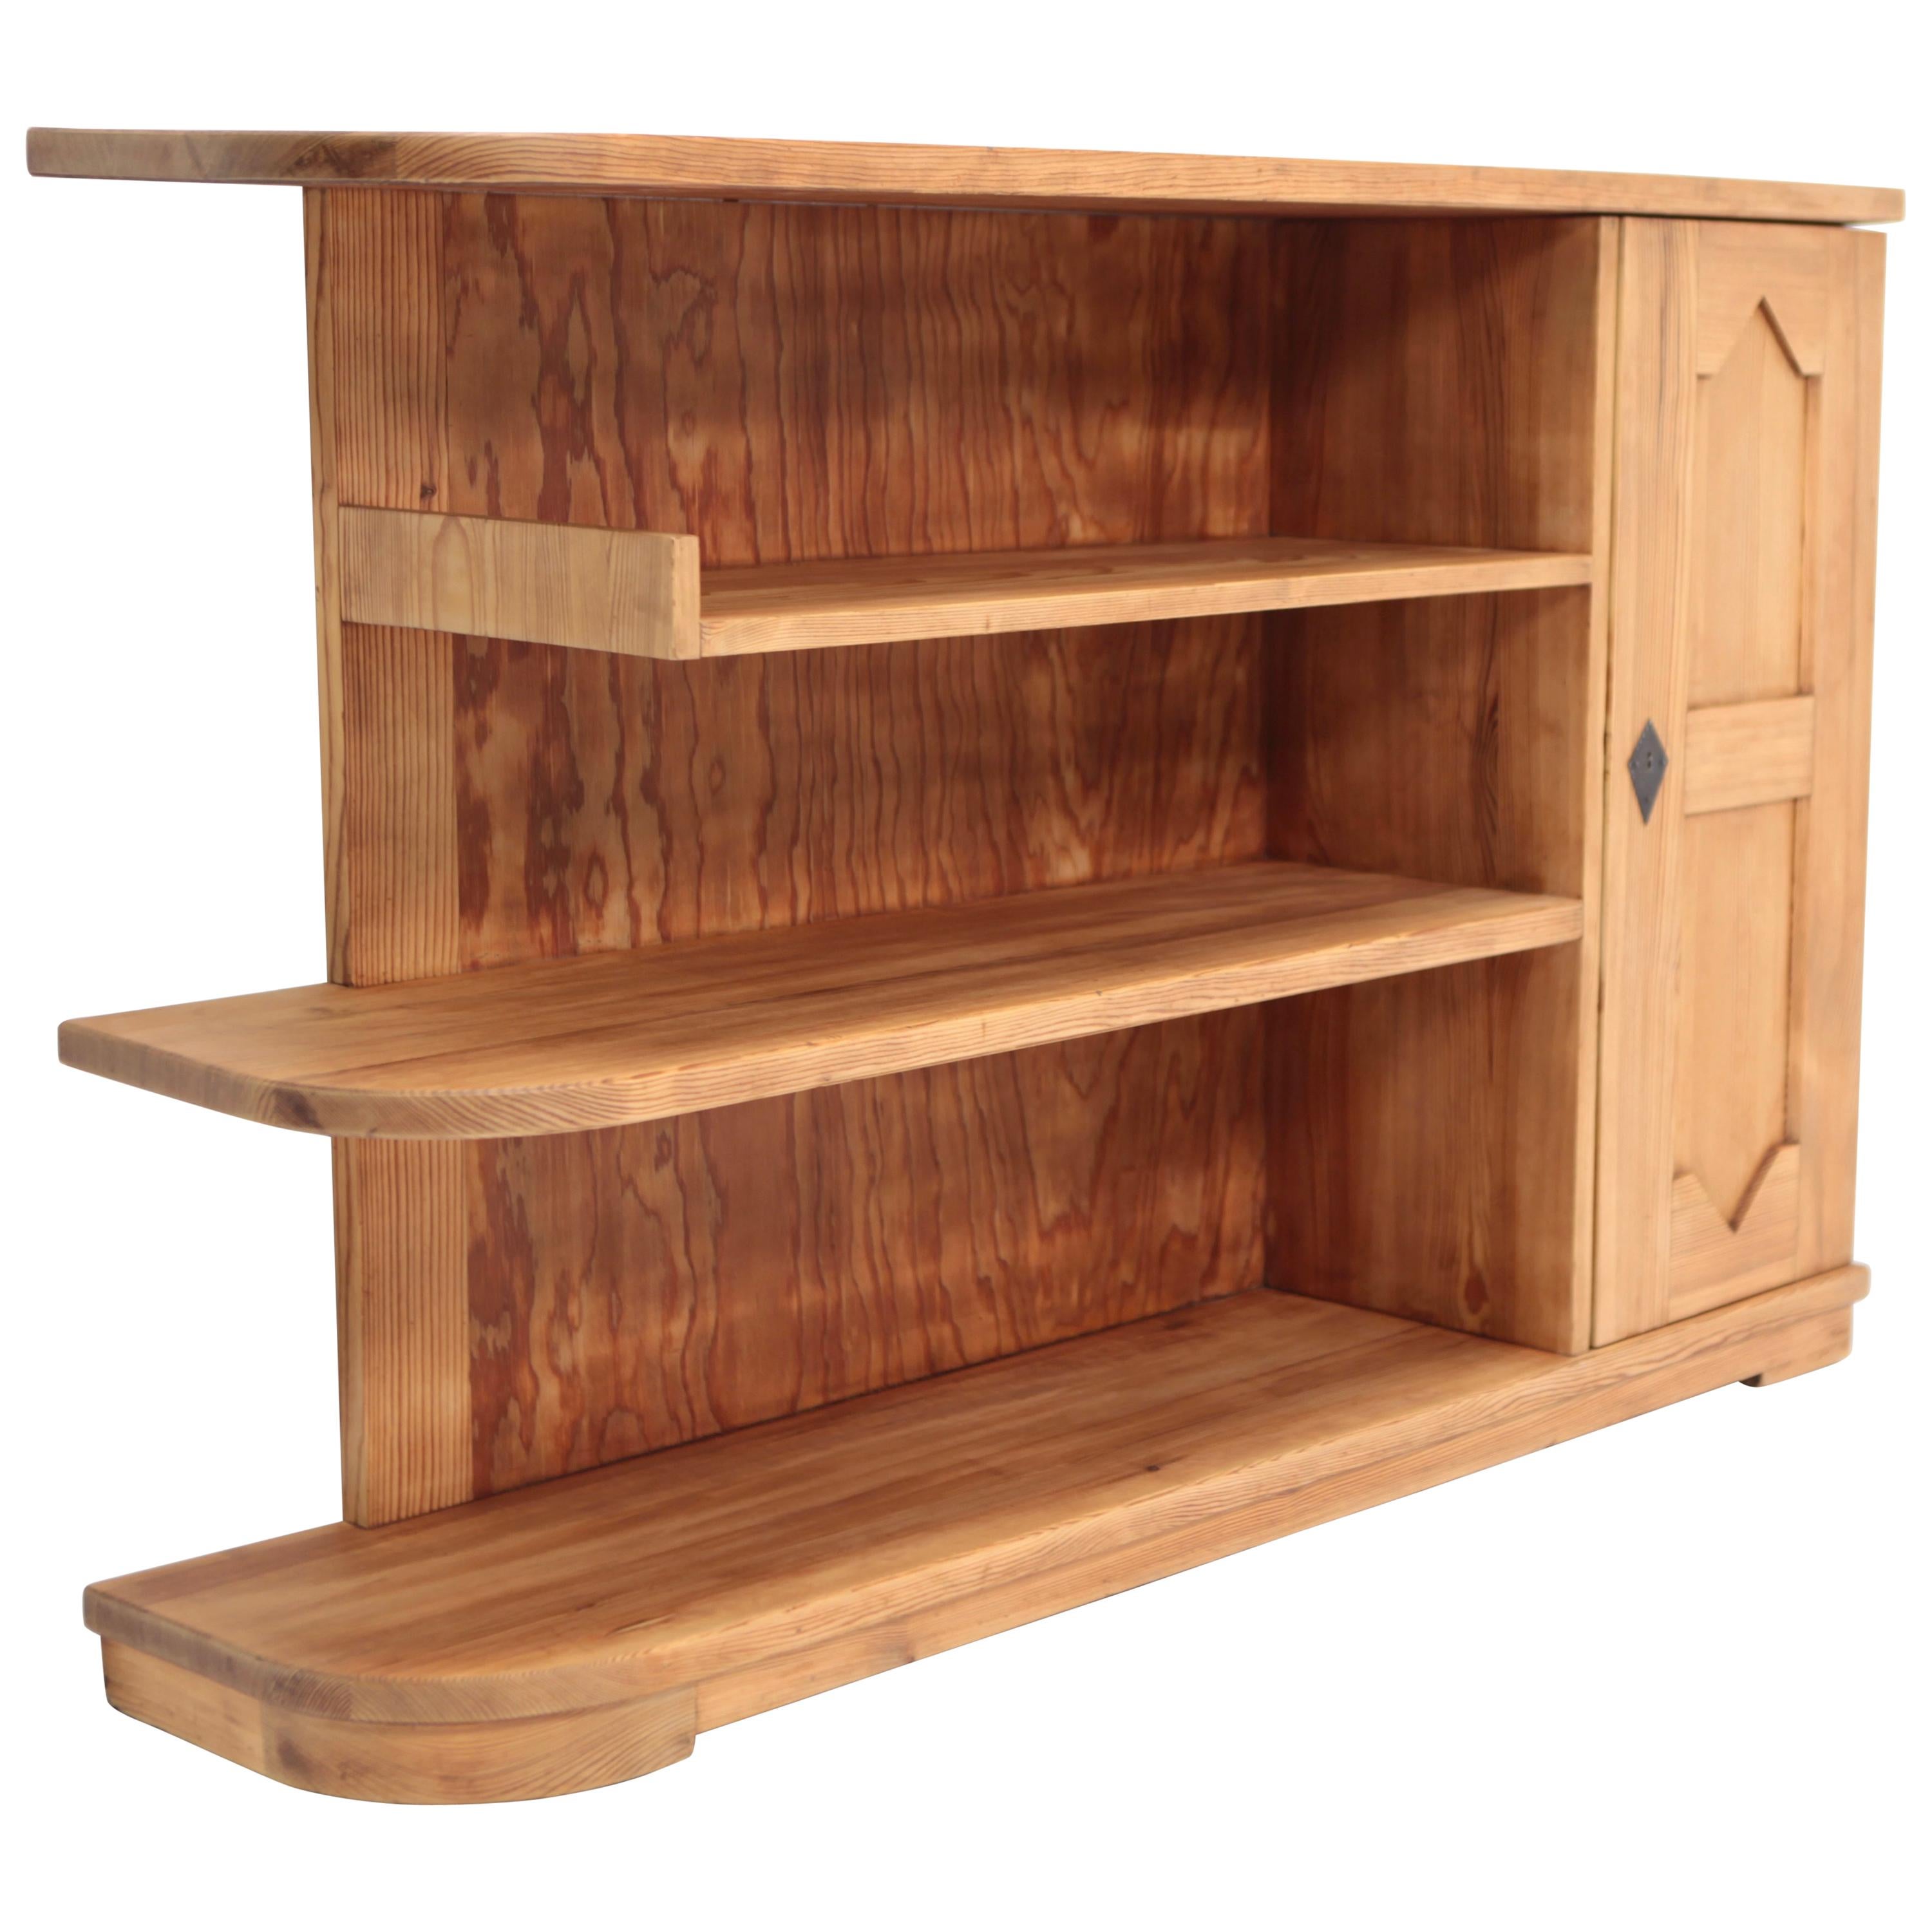 Axel Einar Hjorth, 'Lovö' Bookcase, Acid Stained Pine, Executed by NK in 1939